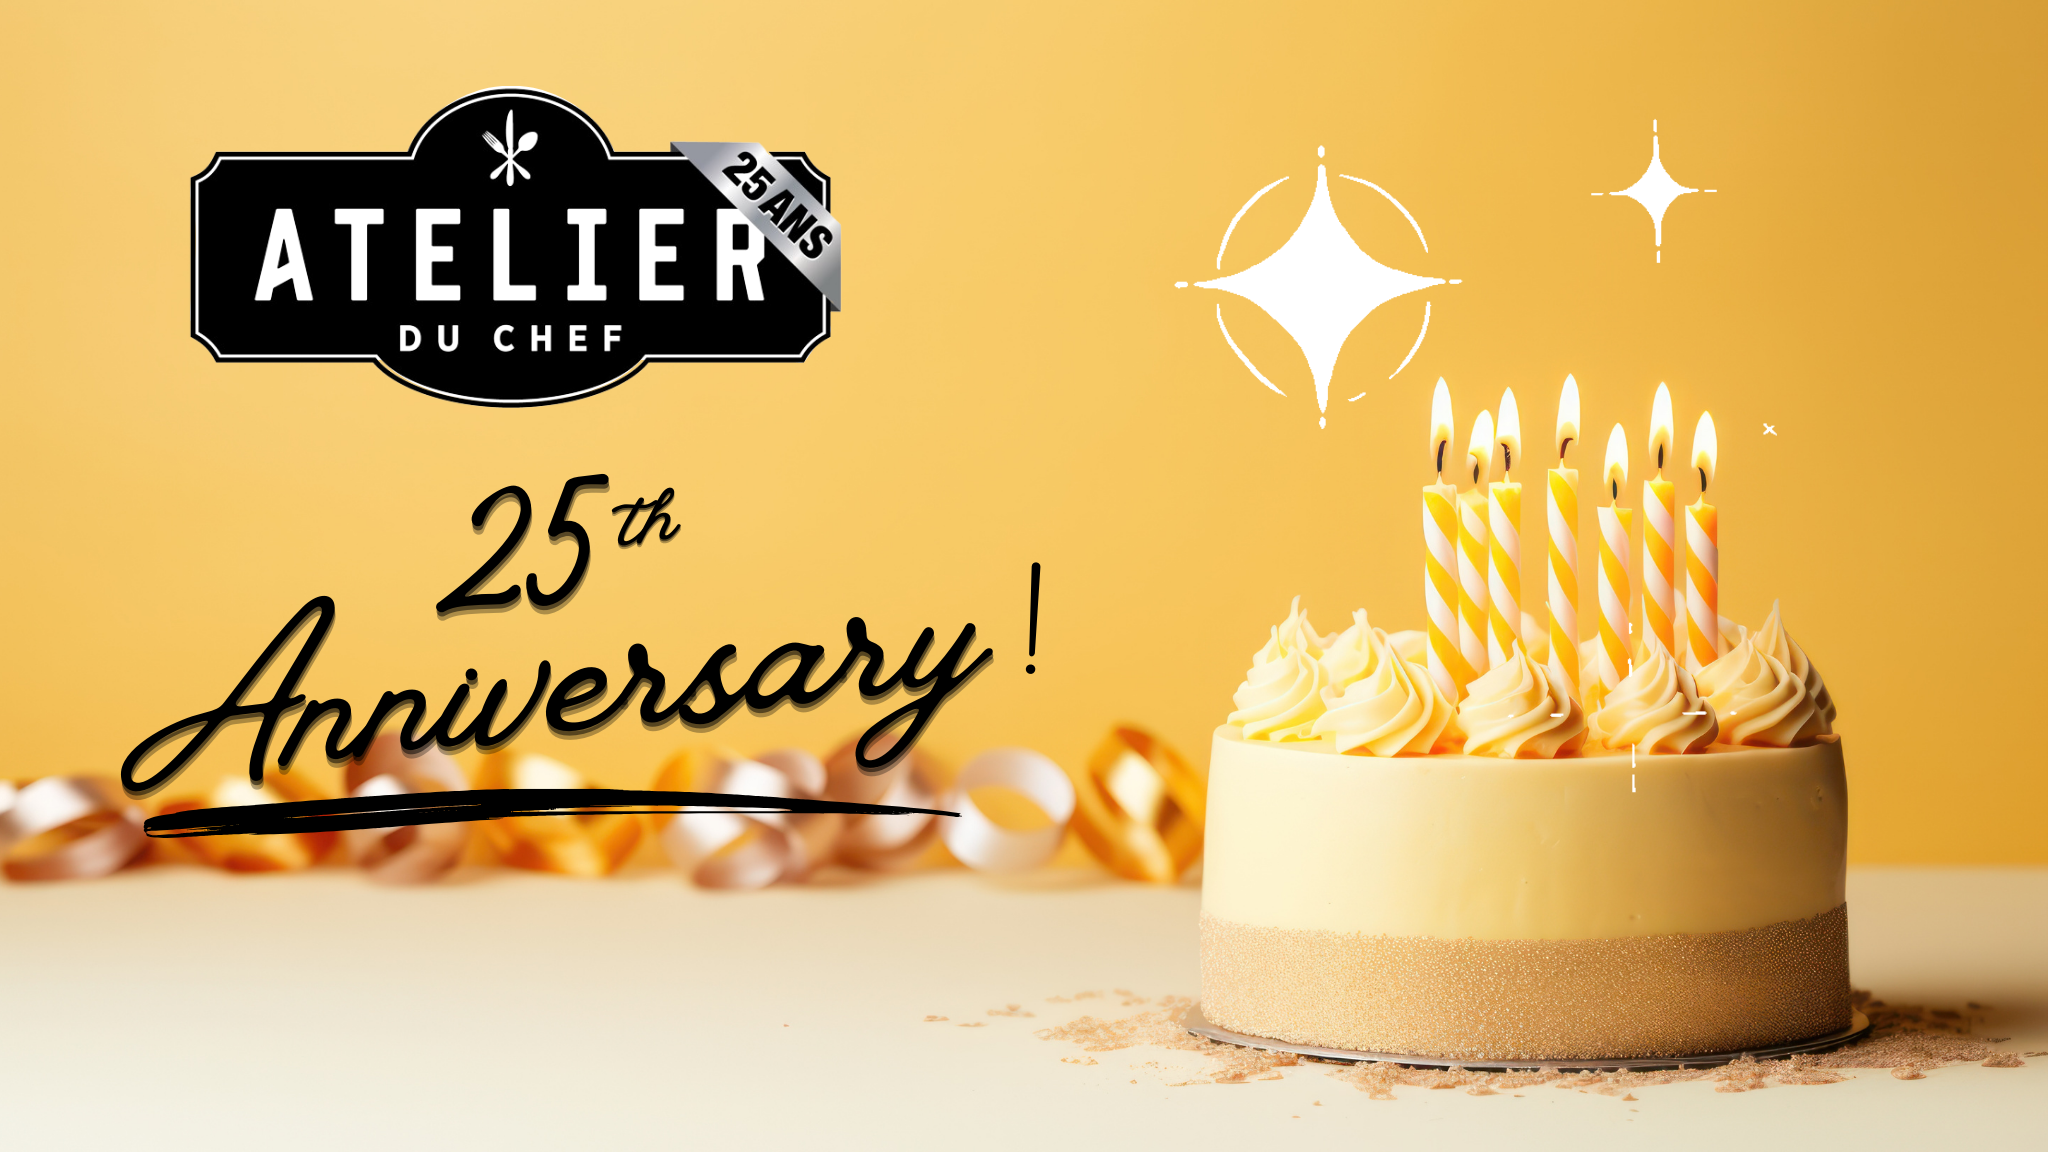 Atelier du Chef - Celebrating 25 years of passion! 